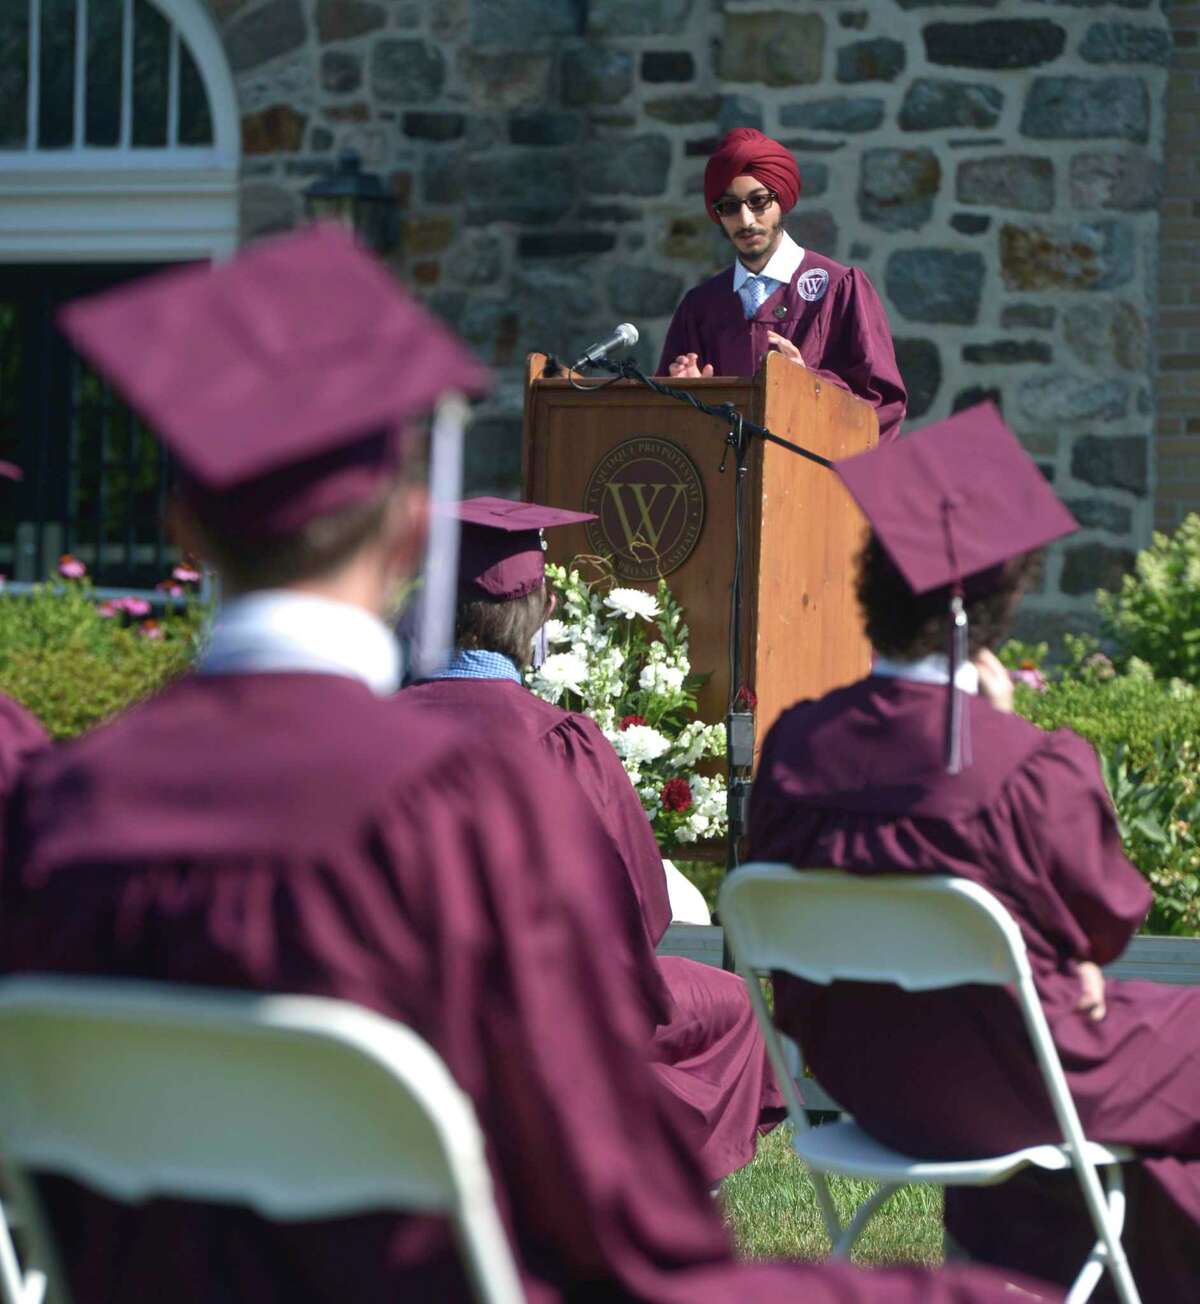 Sartaj Singh, class orator, gives his address during the Wooster School 2020 Commencement Exercises, Monday, July 6, 2020, on the school campus, Danbury, Conn.